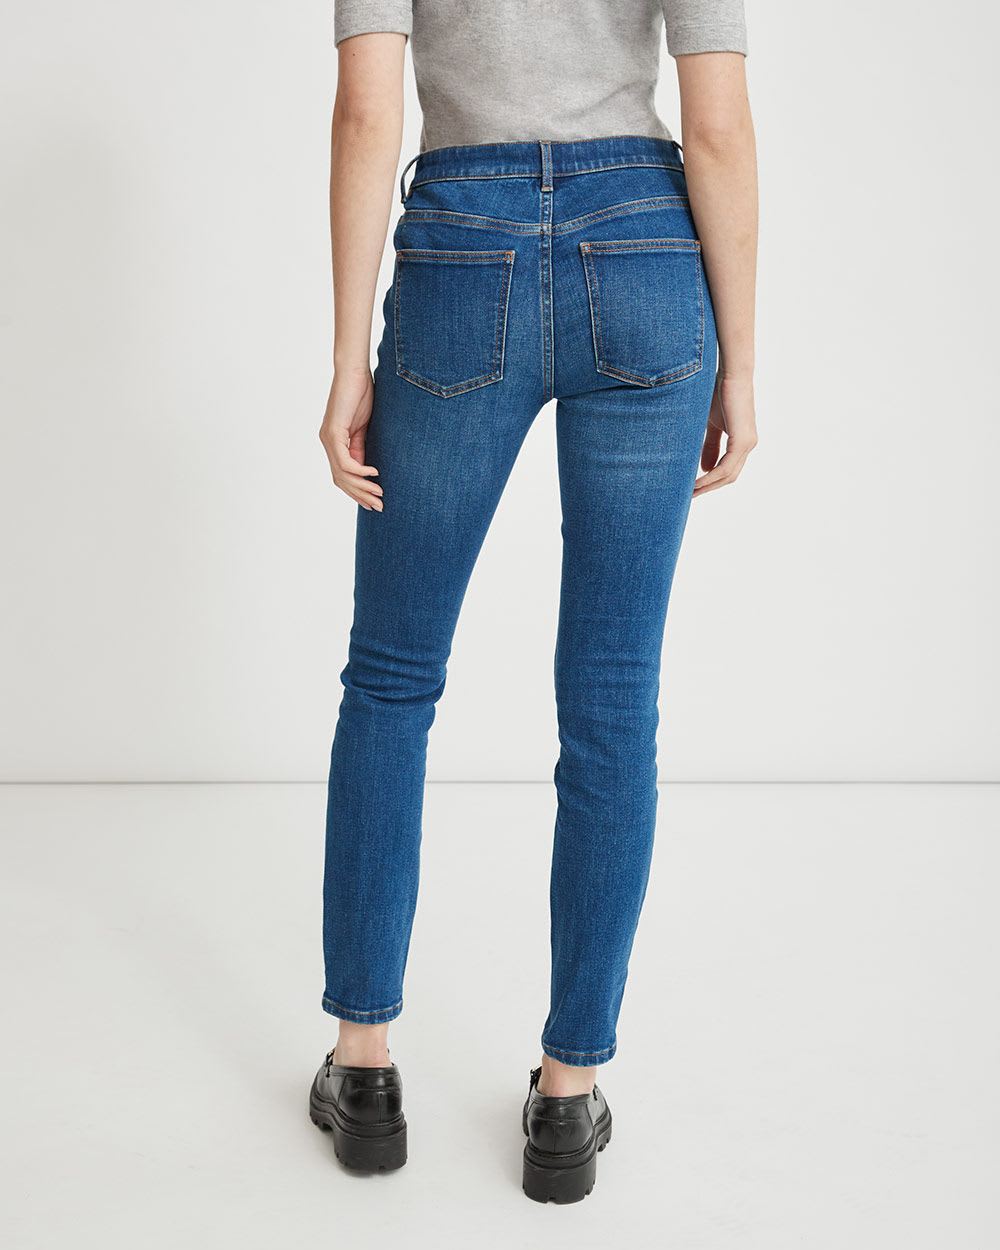 RW & CO Mid-Rise Skinny Jeans - 30